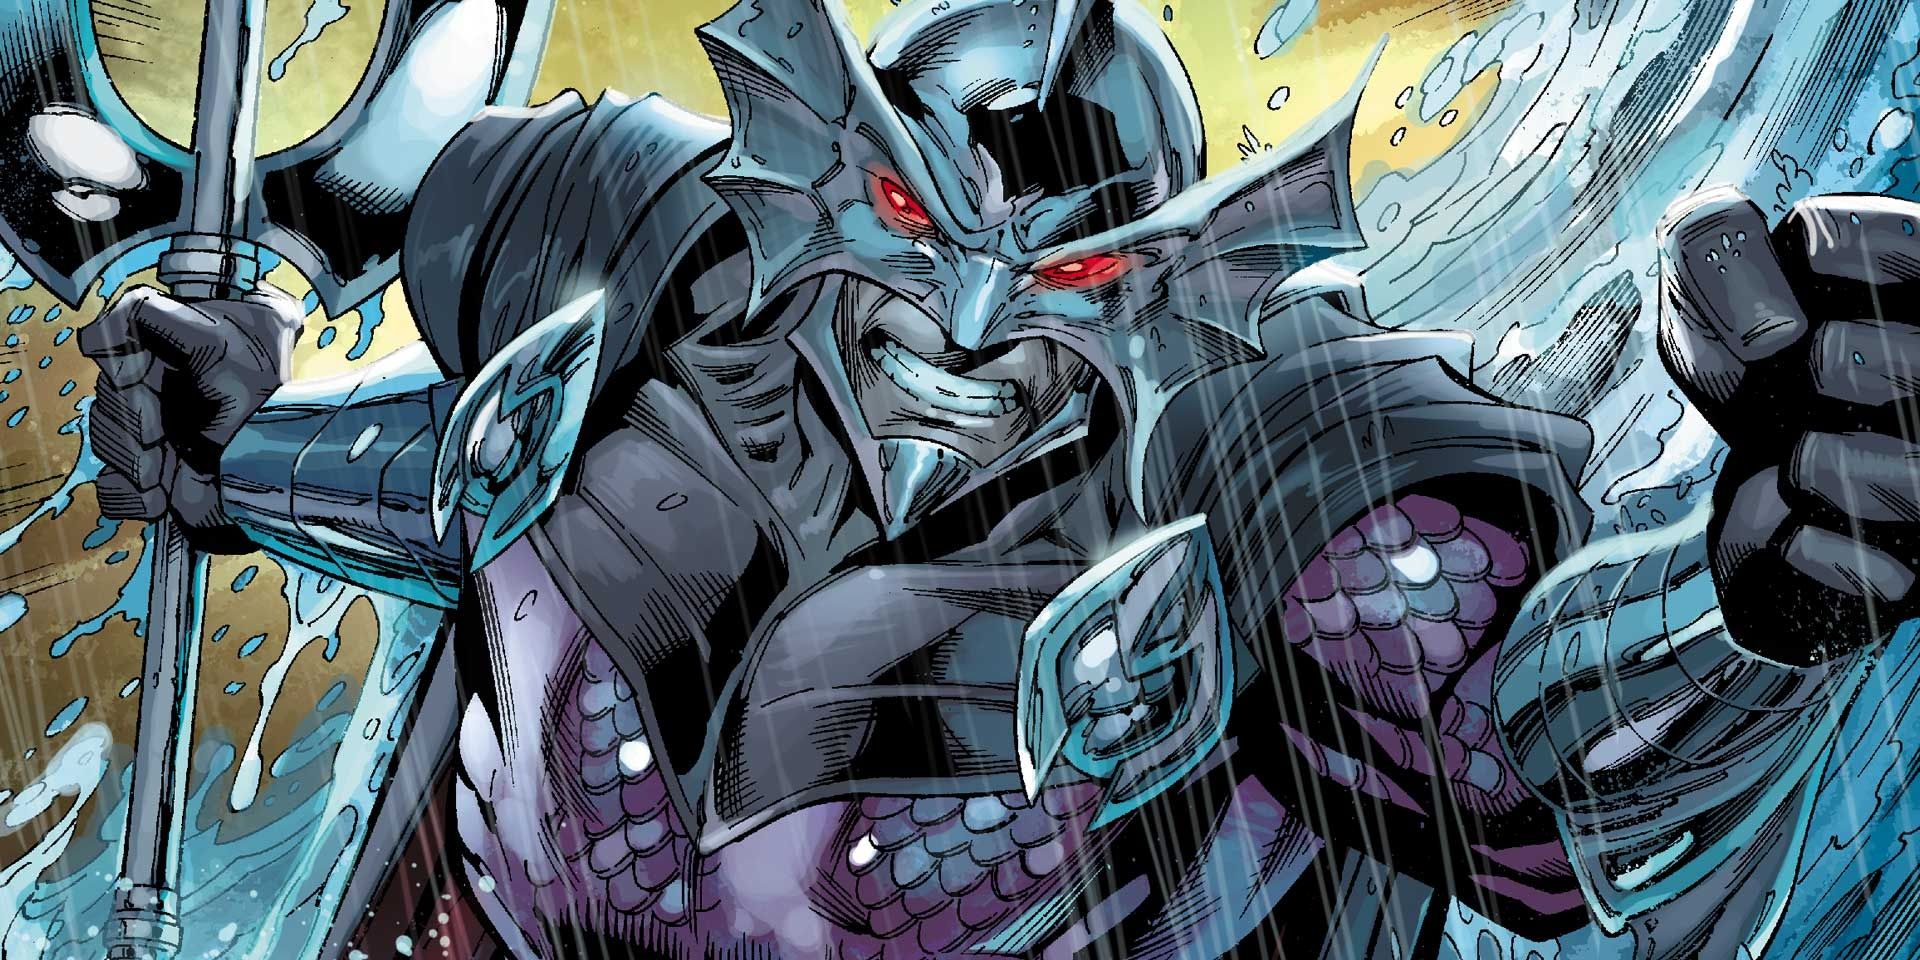 DC Comics' Ocean Master grimacing while holding his trident